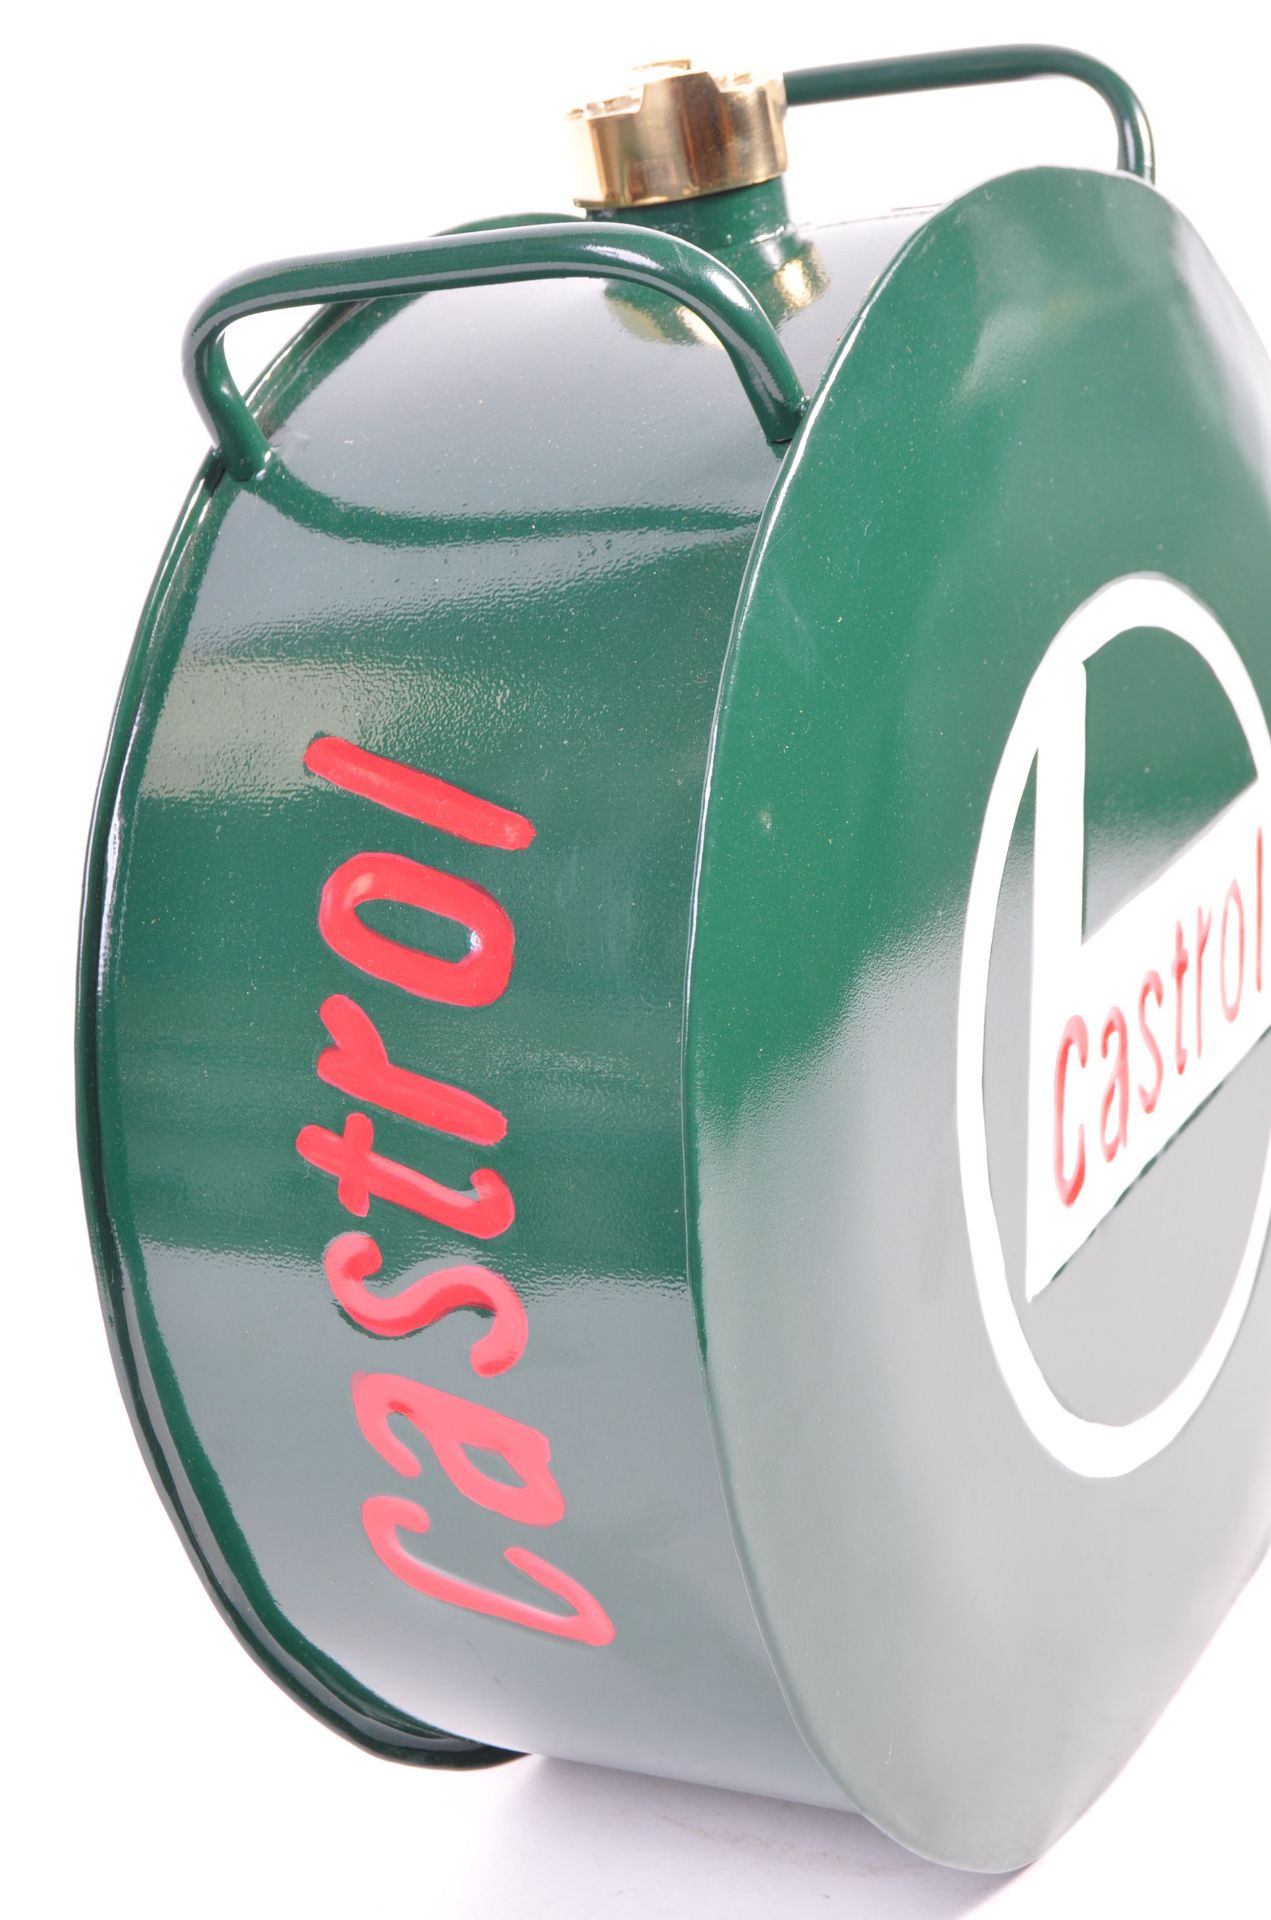 UNUSUAL TIN CIRCULAR OIL CAN FOR CASTROL - Image 2 of 6